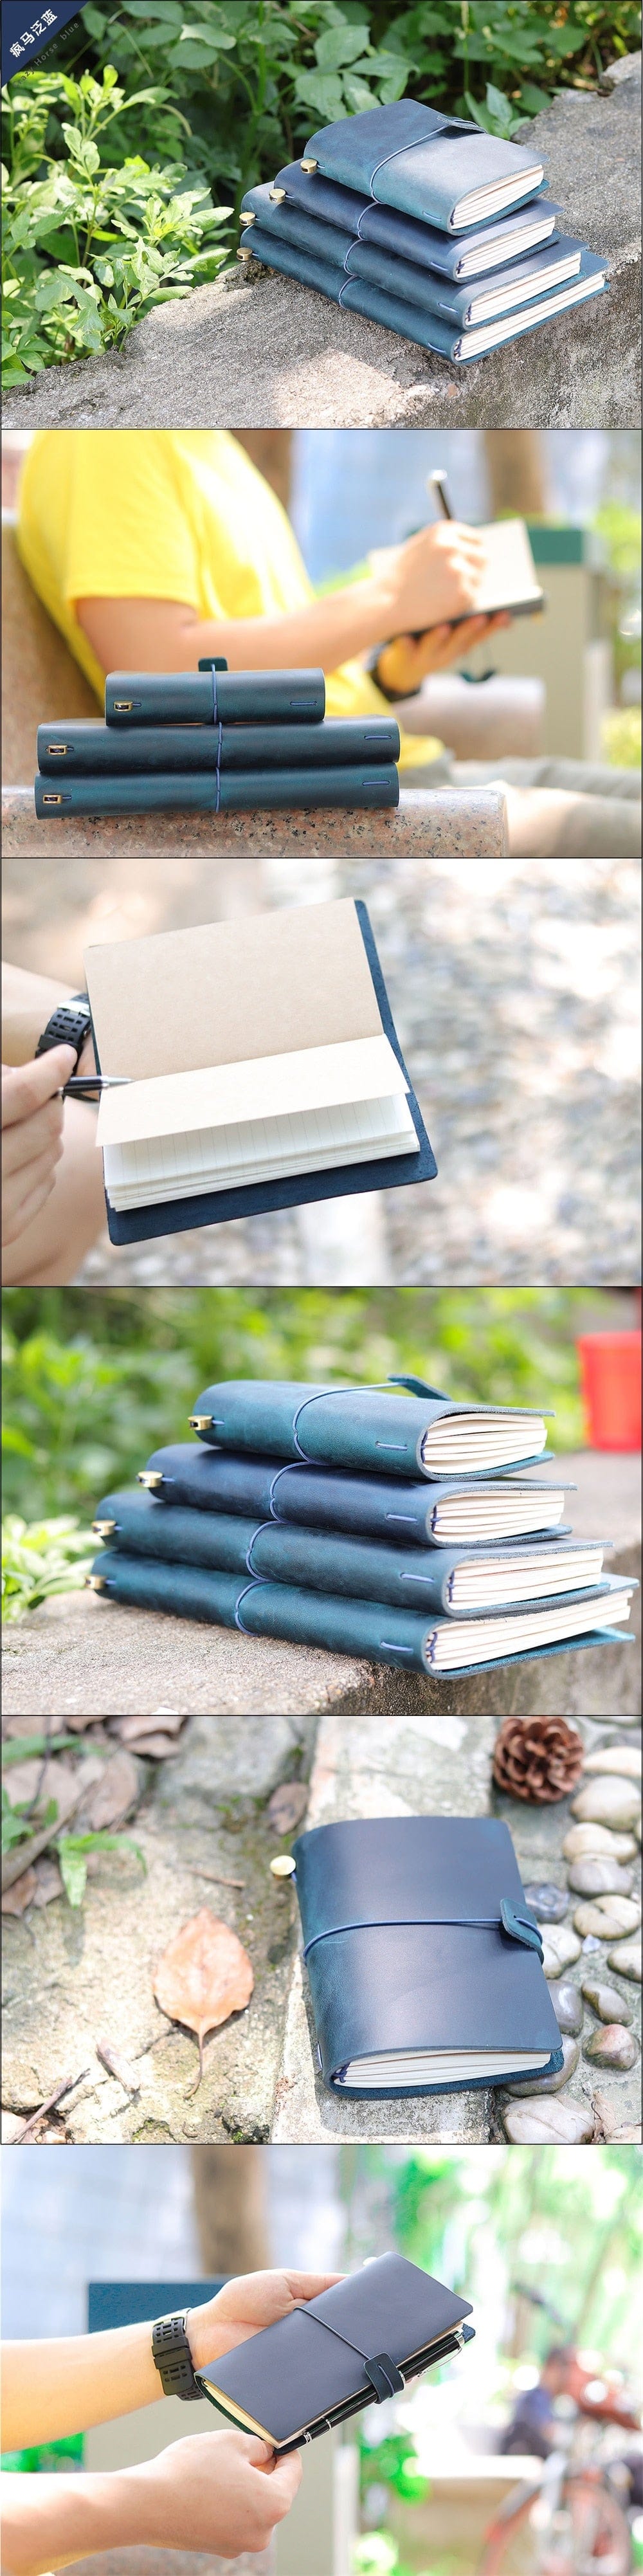 KUMA Stationery & Crafts  Genuine Leather Travelers Notebook ✨ Free Embossing ✨ 4 Sizes & 8 Colors